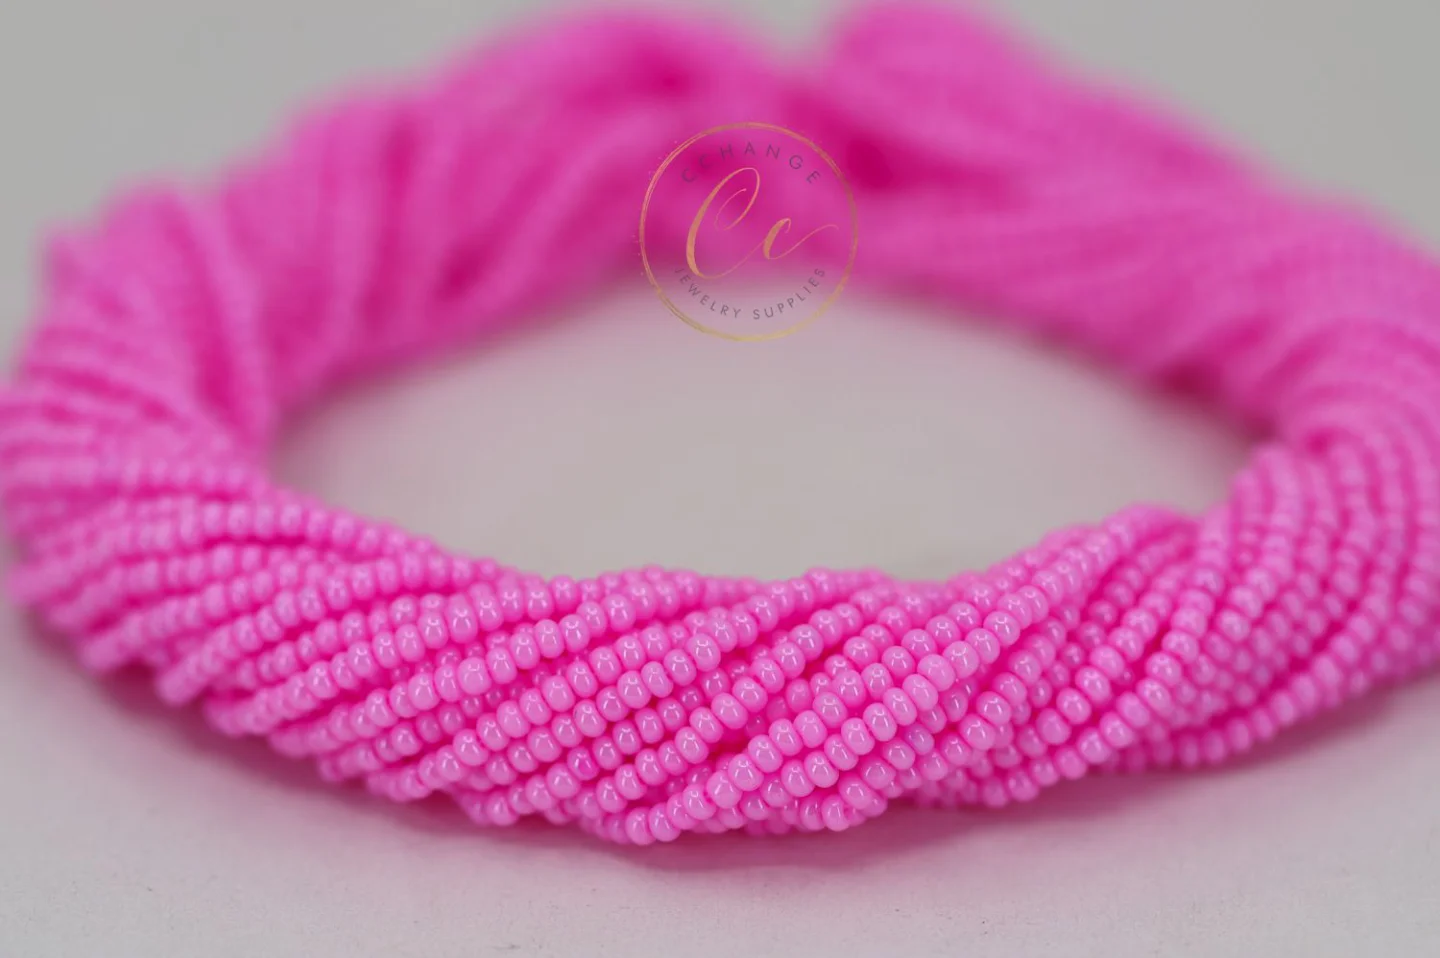 bright-pink-seed-bead-16173.